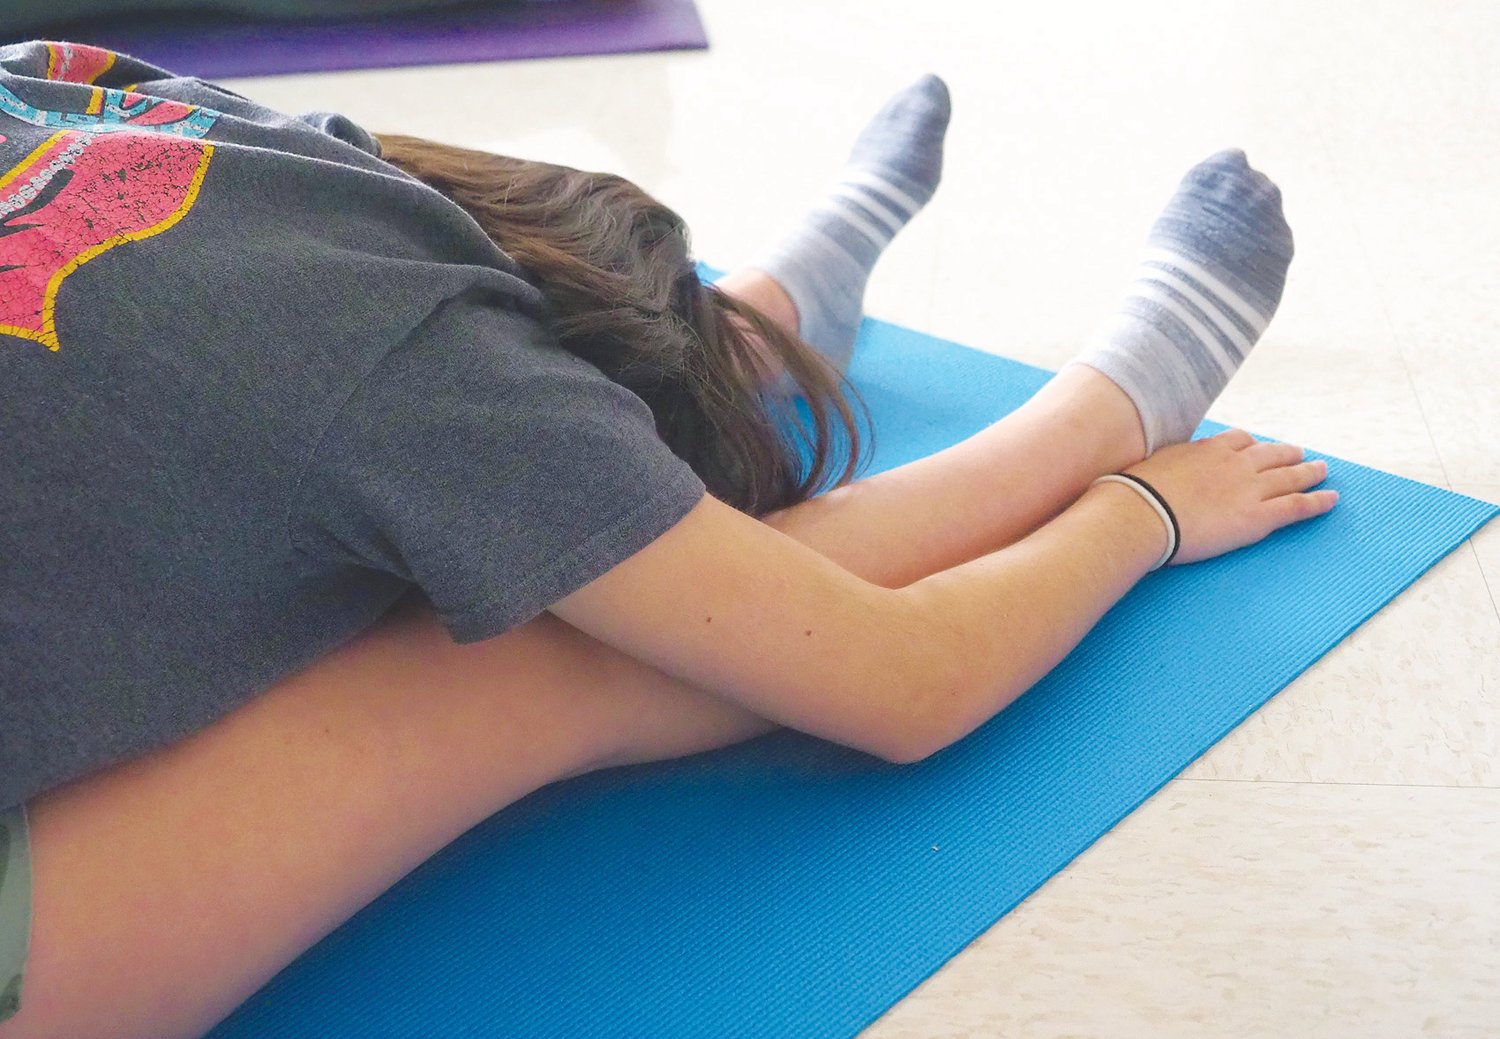 Student Annagrace Z. goes into a pose that gently stretches her body, builds stamina and calms her mind.